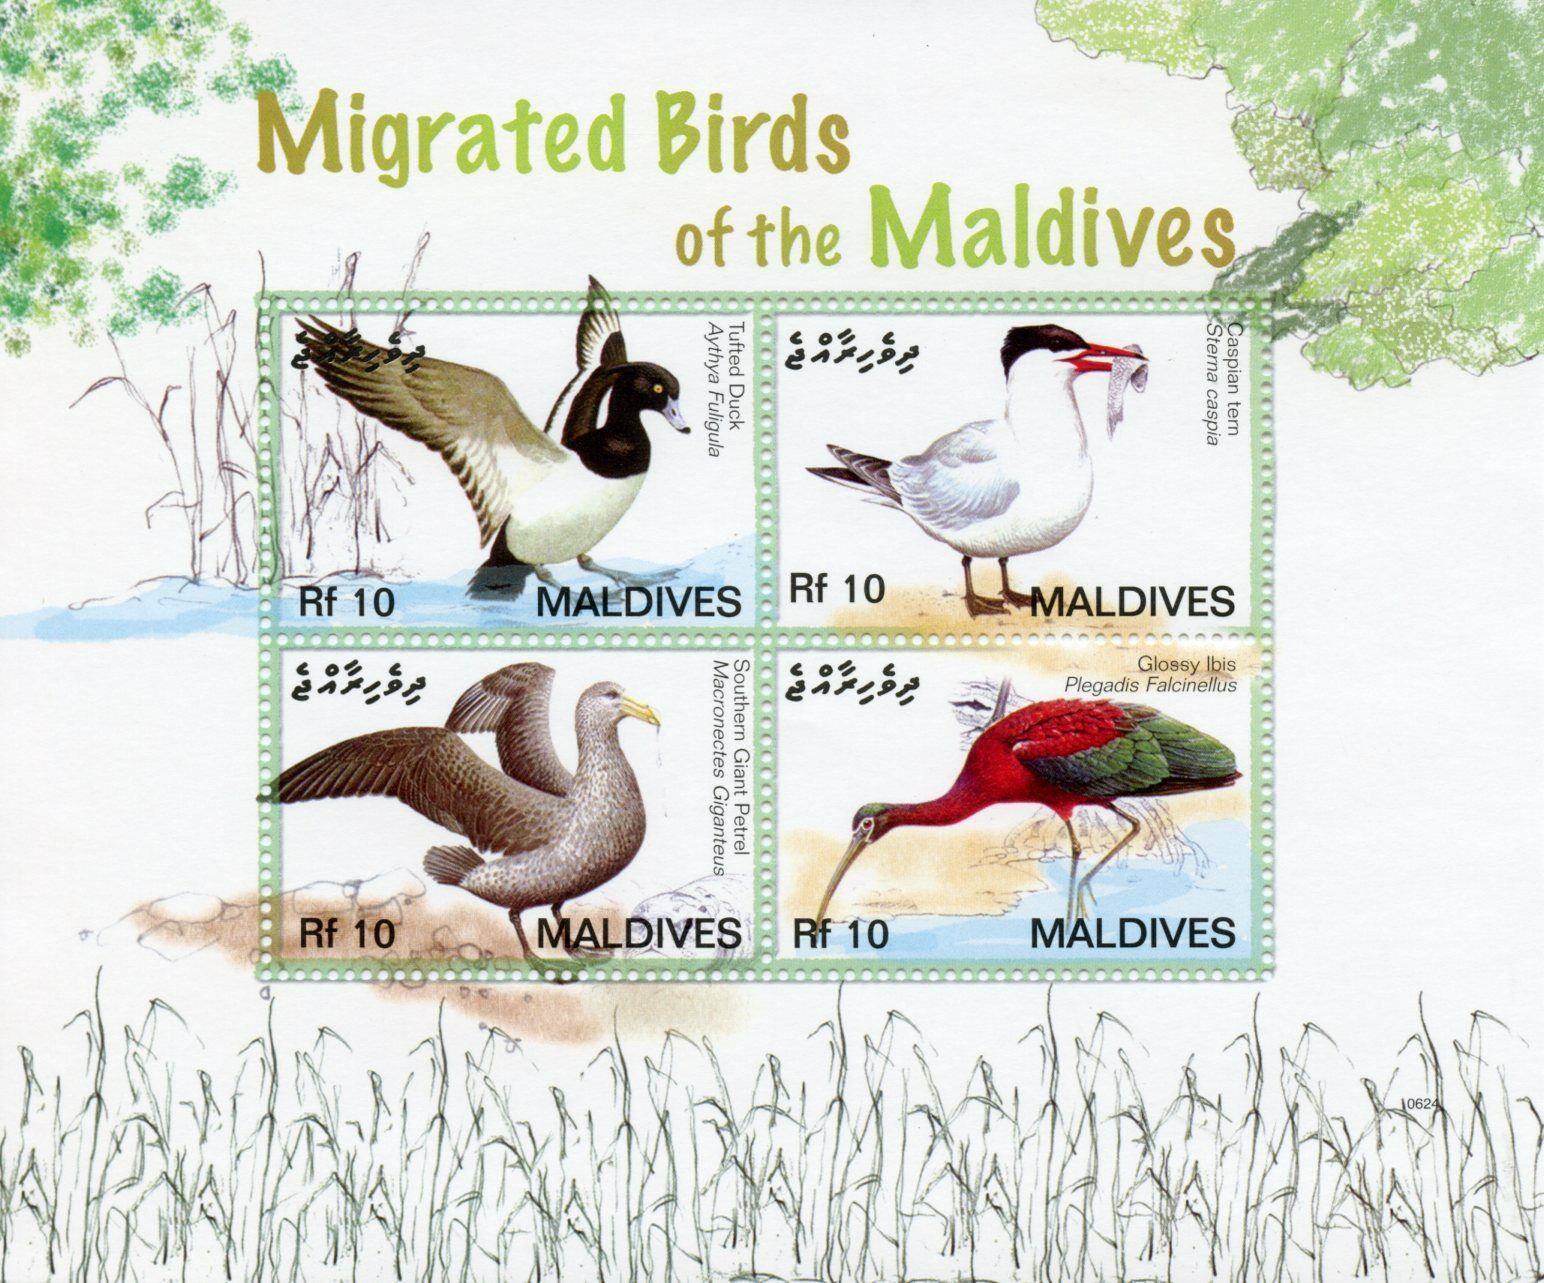 Maldives 2006 MNH Migrated Birds on Stamps Tufted Duck Tern Petrel Ibis 4v M/S II